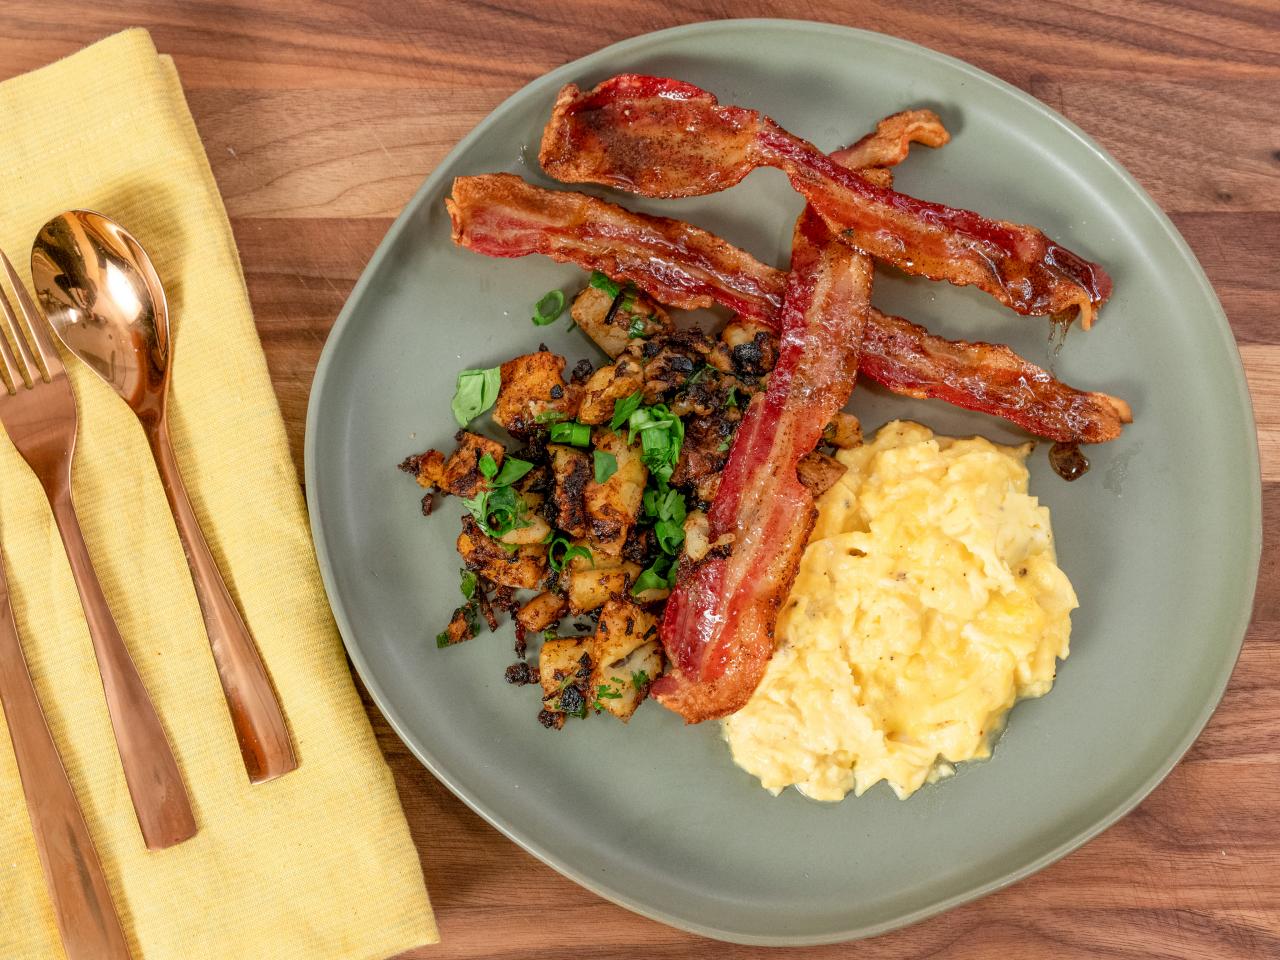 https://food.fnr.sndimg.com/content/dam/images/food/plus/fullset/2020/01/21/0/FN_FNKLive-102719-Perfect-Scrambled-Eggs-with-Spicy-Classic-Home-Fries-and-Glazed-Bacon_s4x3.jpg.rend.hgtvcom.1280.960.suffix/1579376065273.jpeg